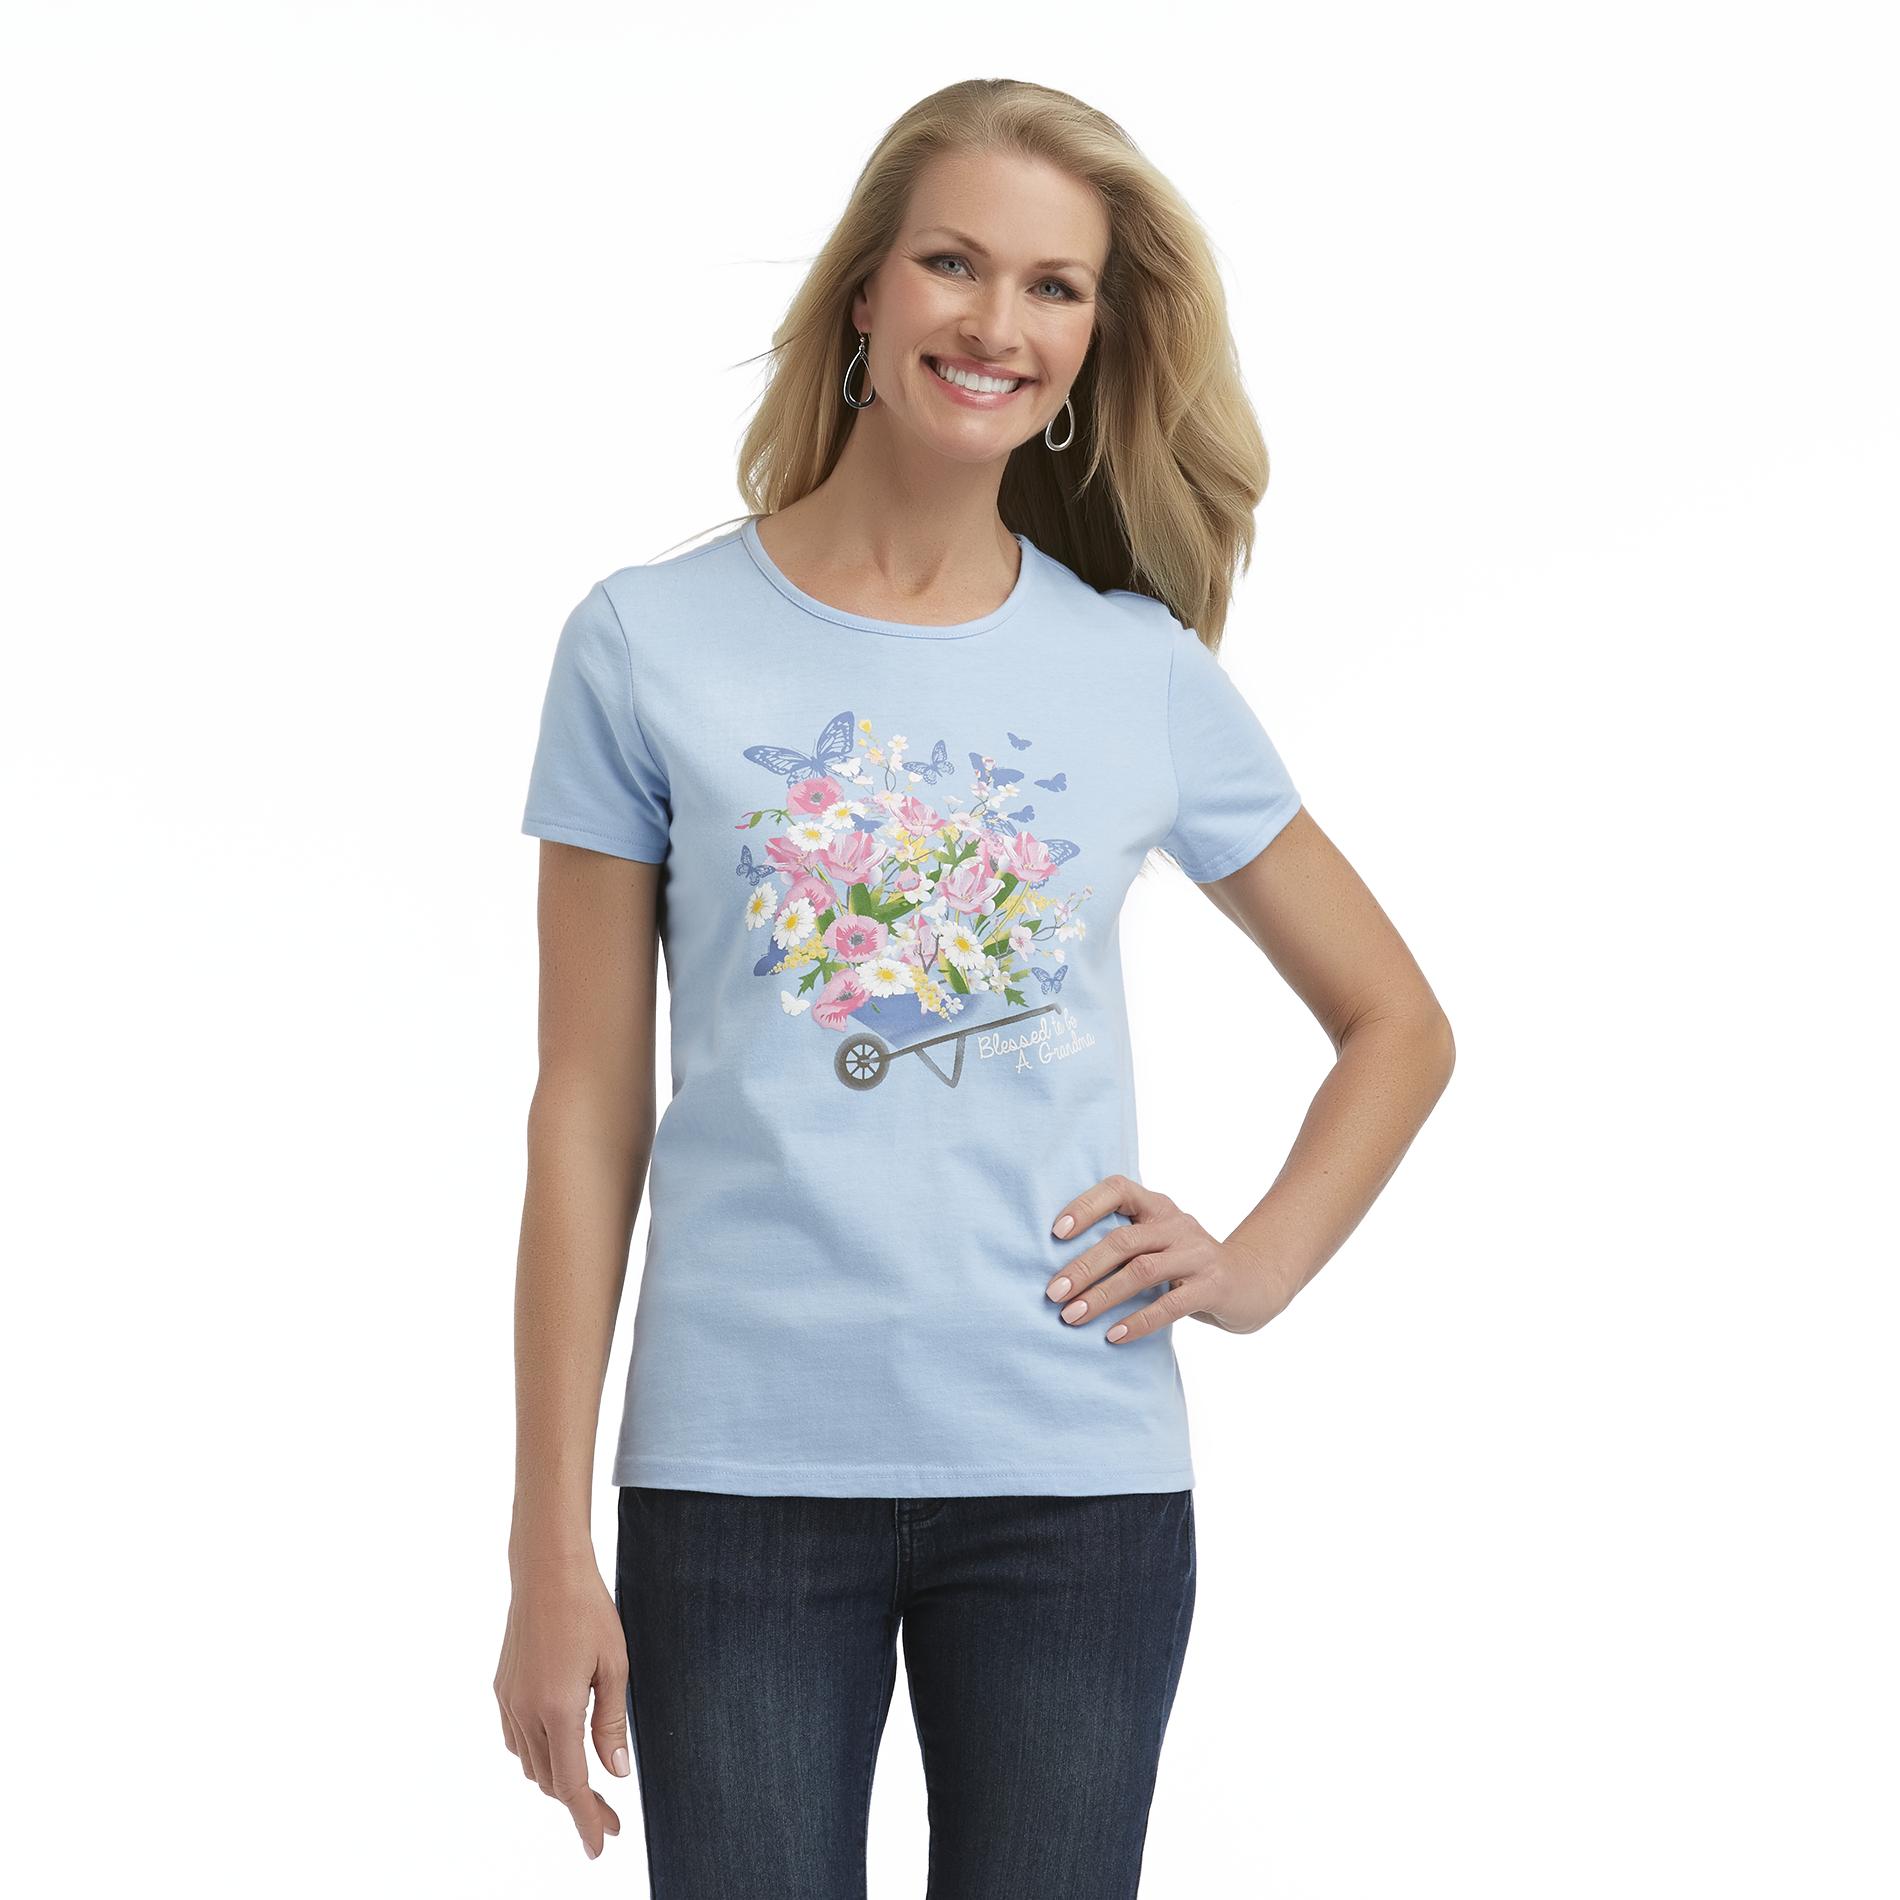 Holiday Editions Women's Grandmother Graphic T-Shirt - Floral Butterfly